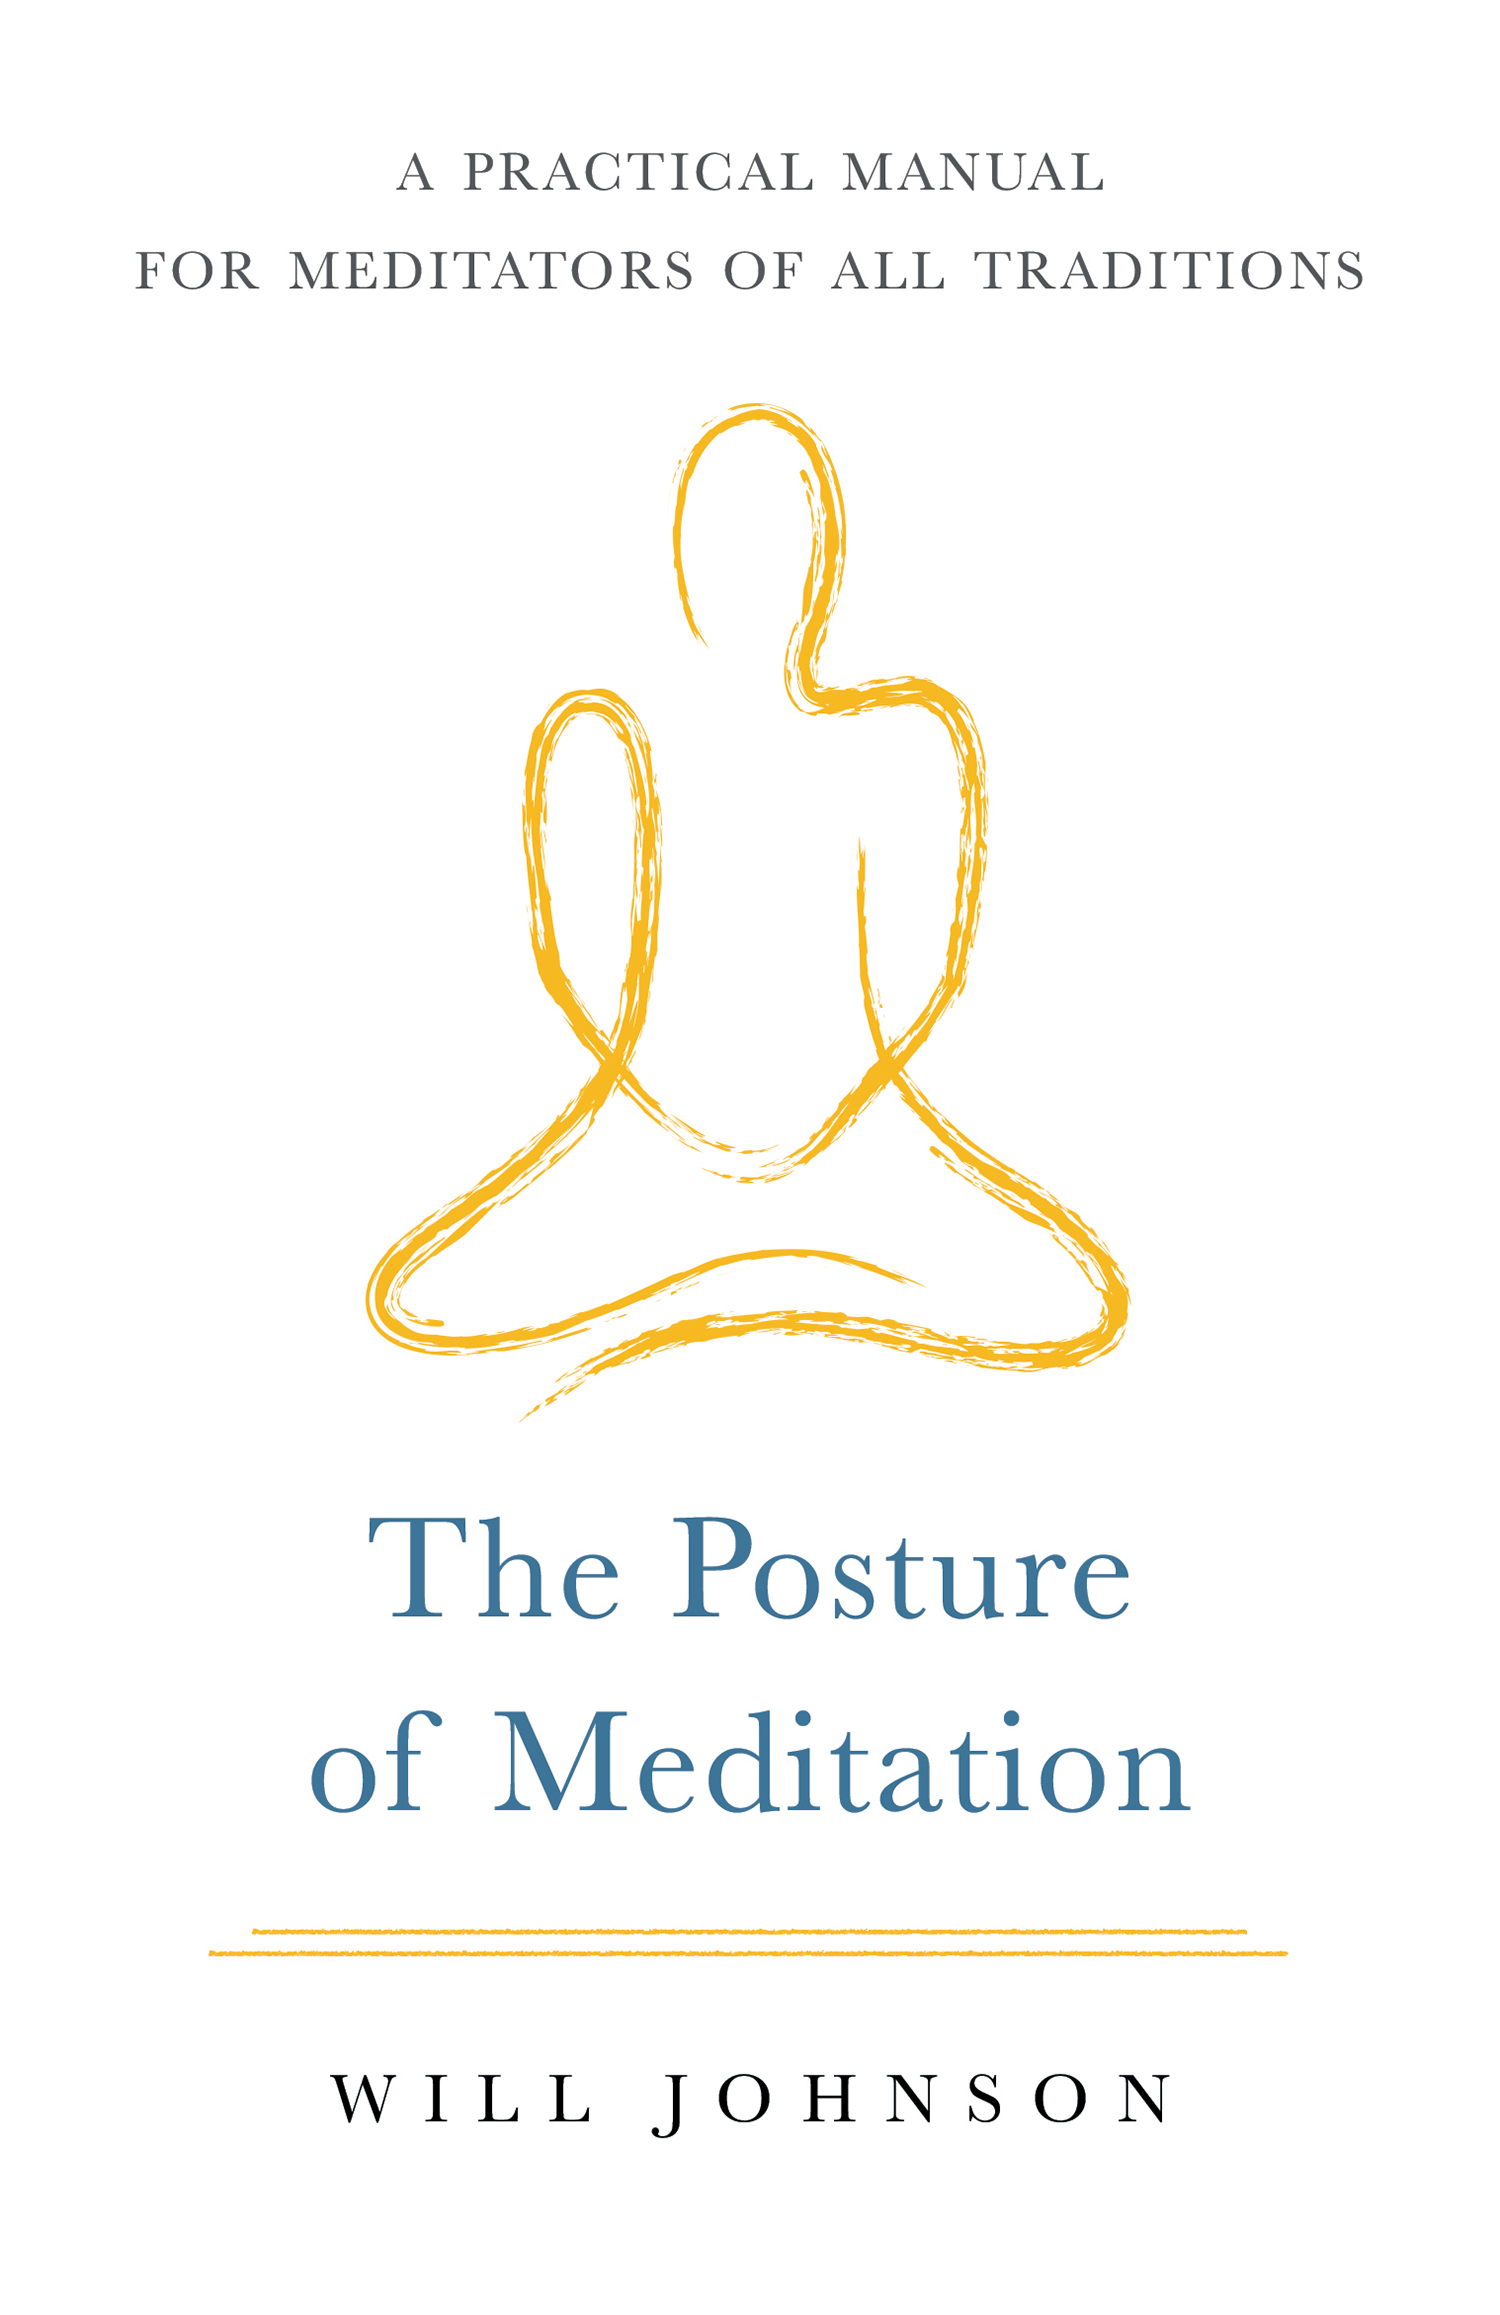 When Will Johnson first offered the The Posture of Meditation in 1996 - photo 1